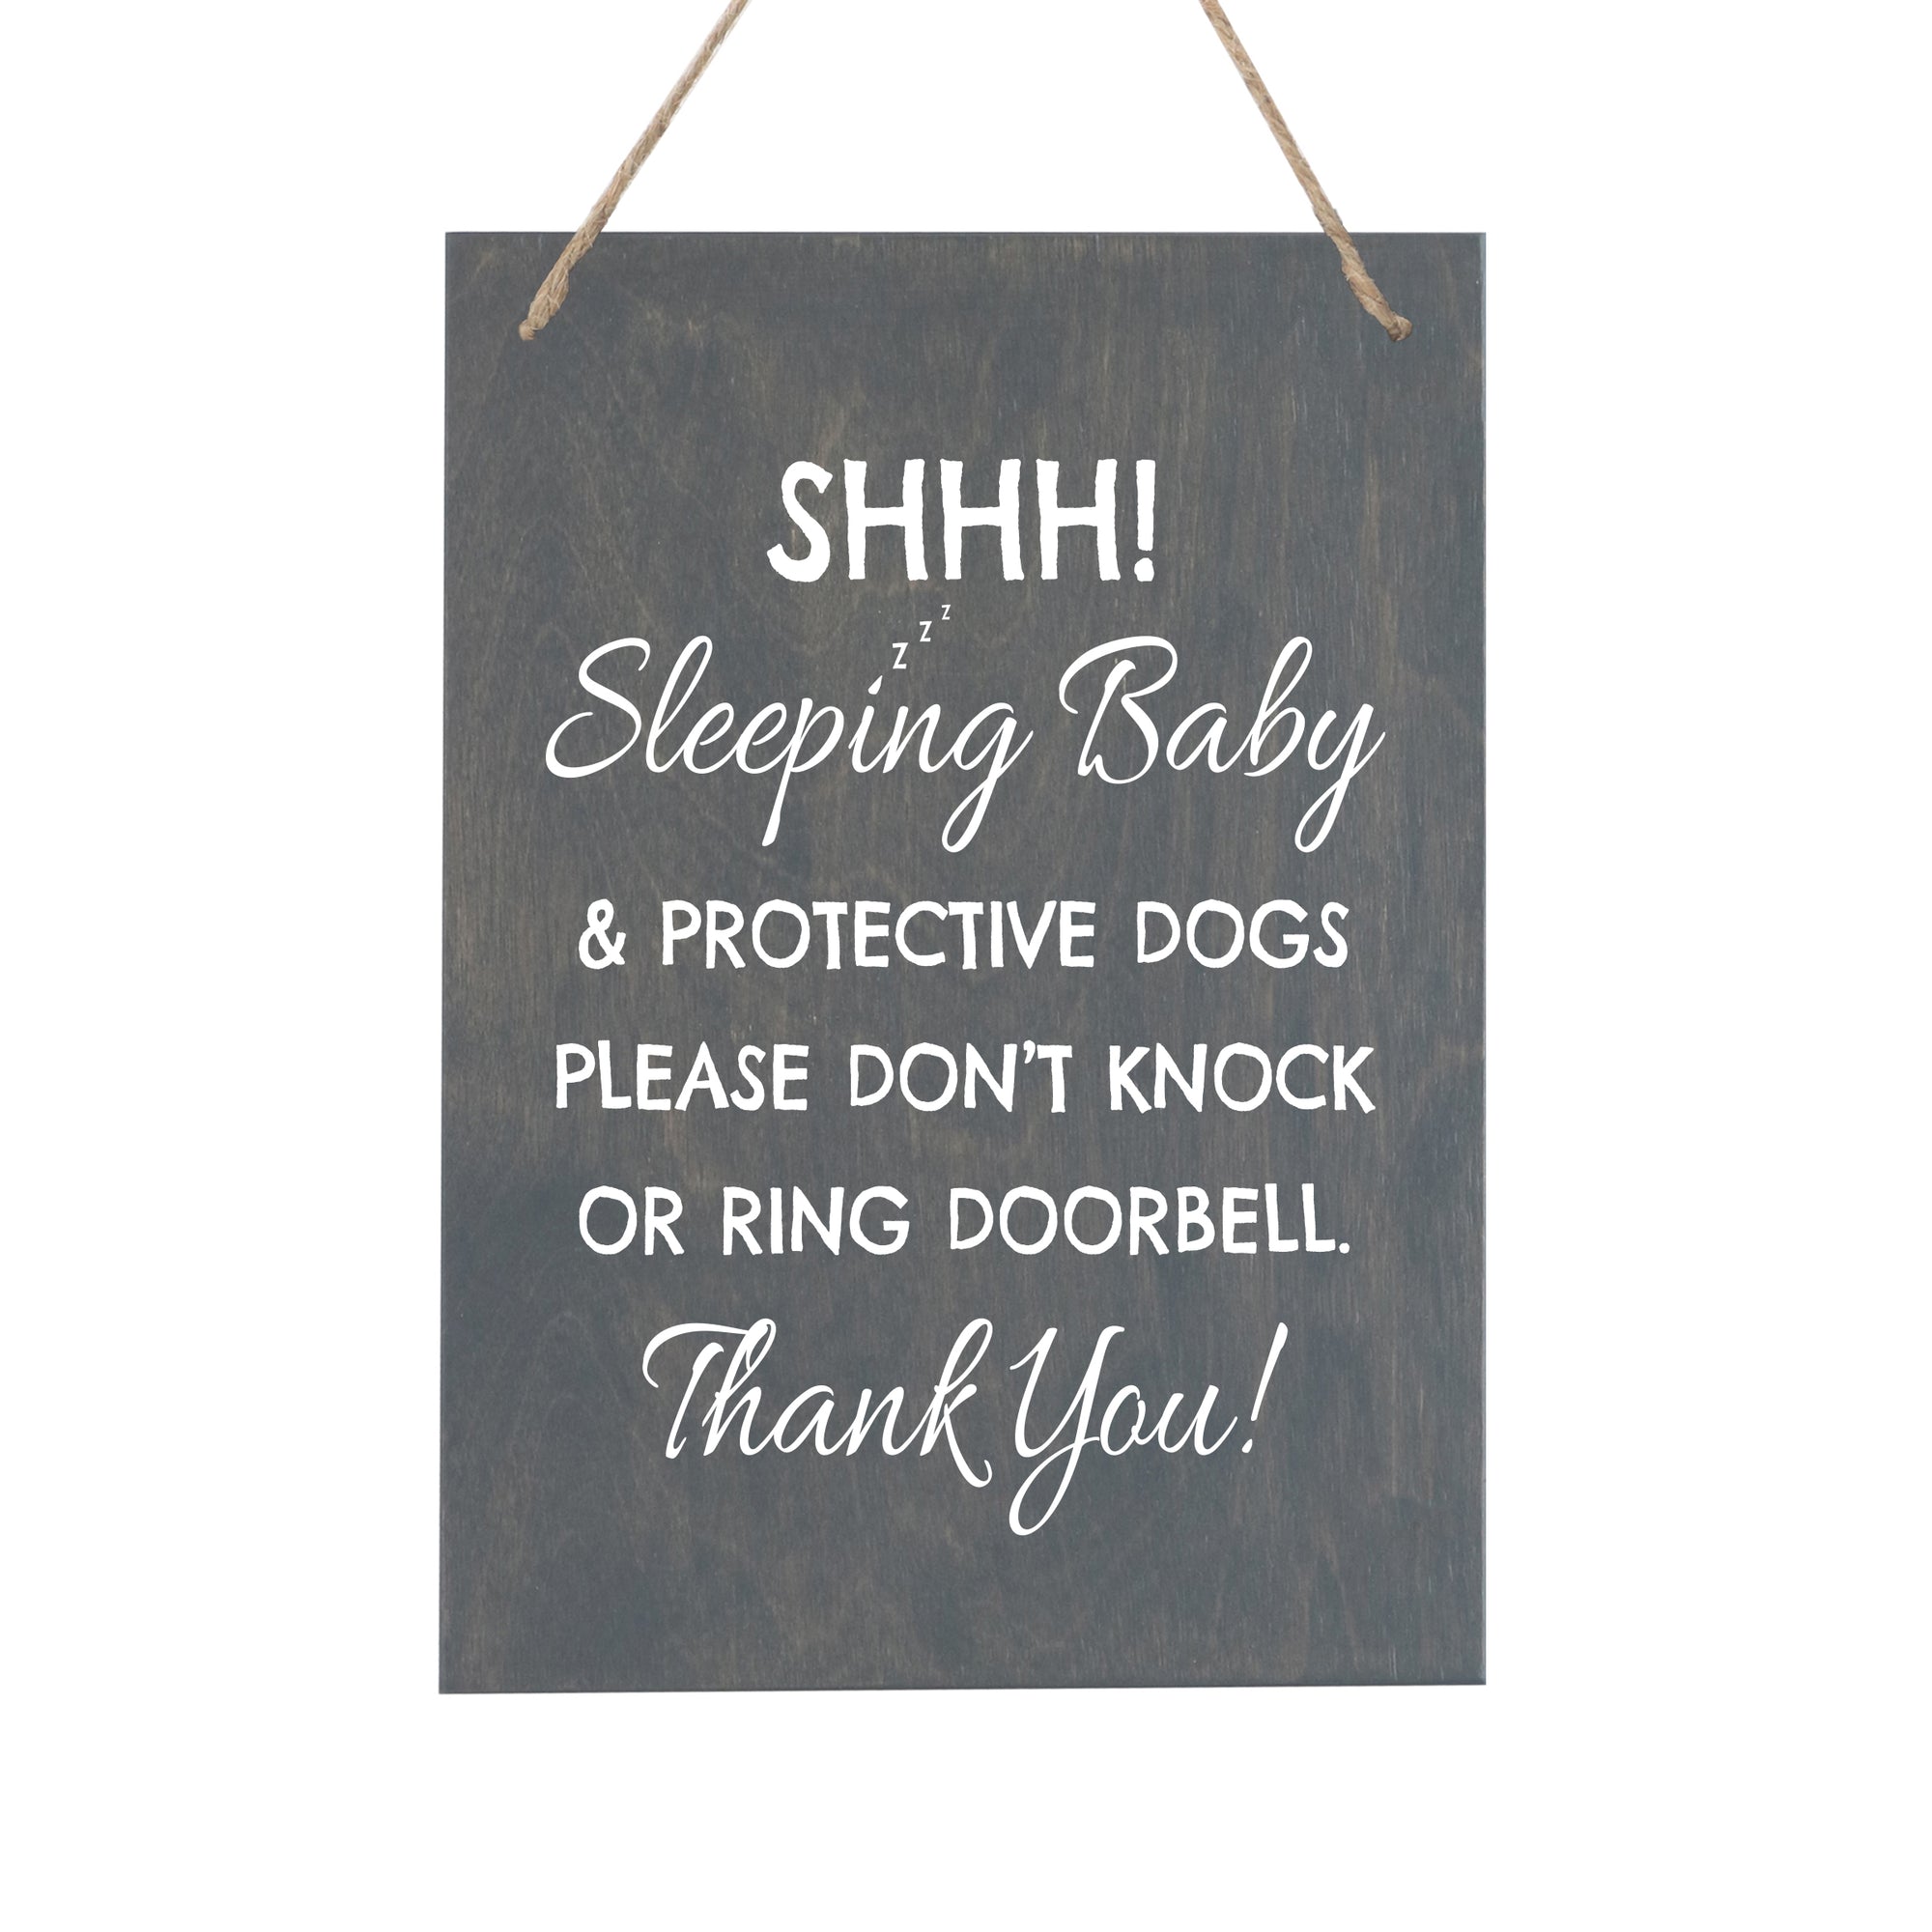 LifeSong Milestones Sleeping Baby Protective Puppies Baltic Birch Rope Hanging Sign for Front Door - Do Not Knock or Ring Doorbell - Quiet Entry for House New Home Decor - 8x9.75